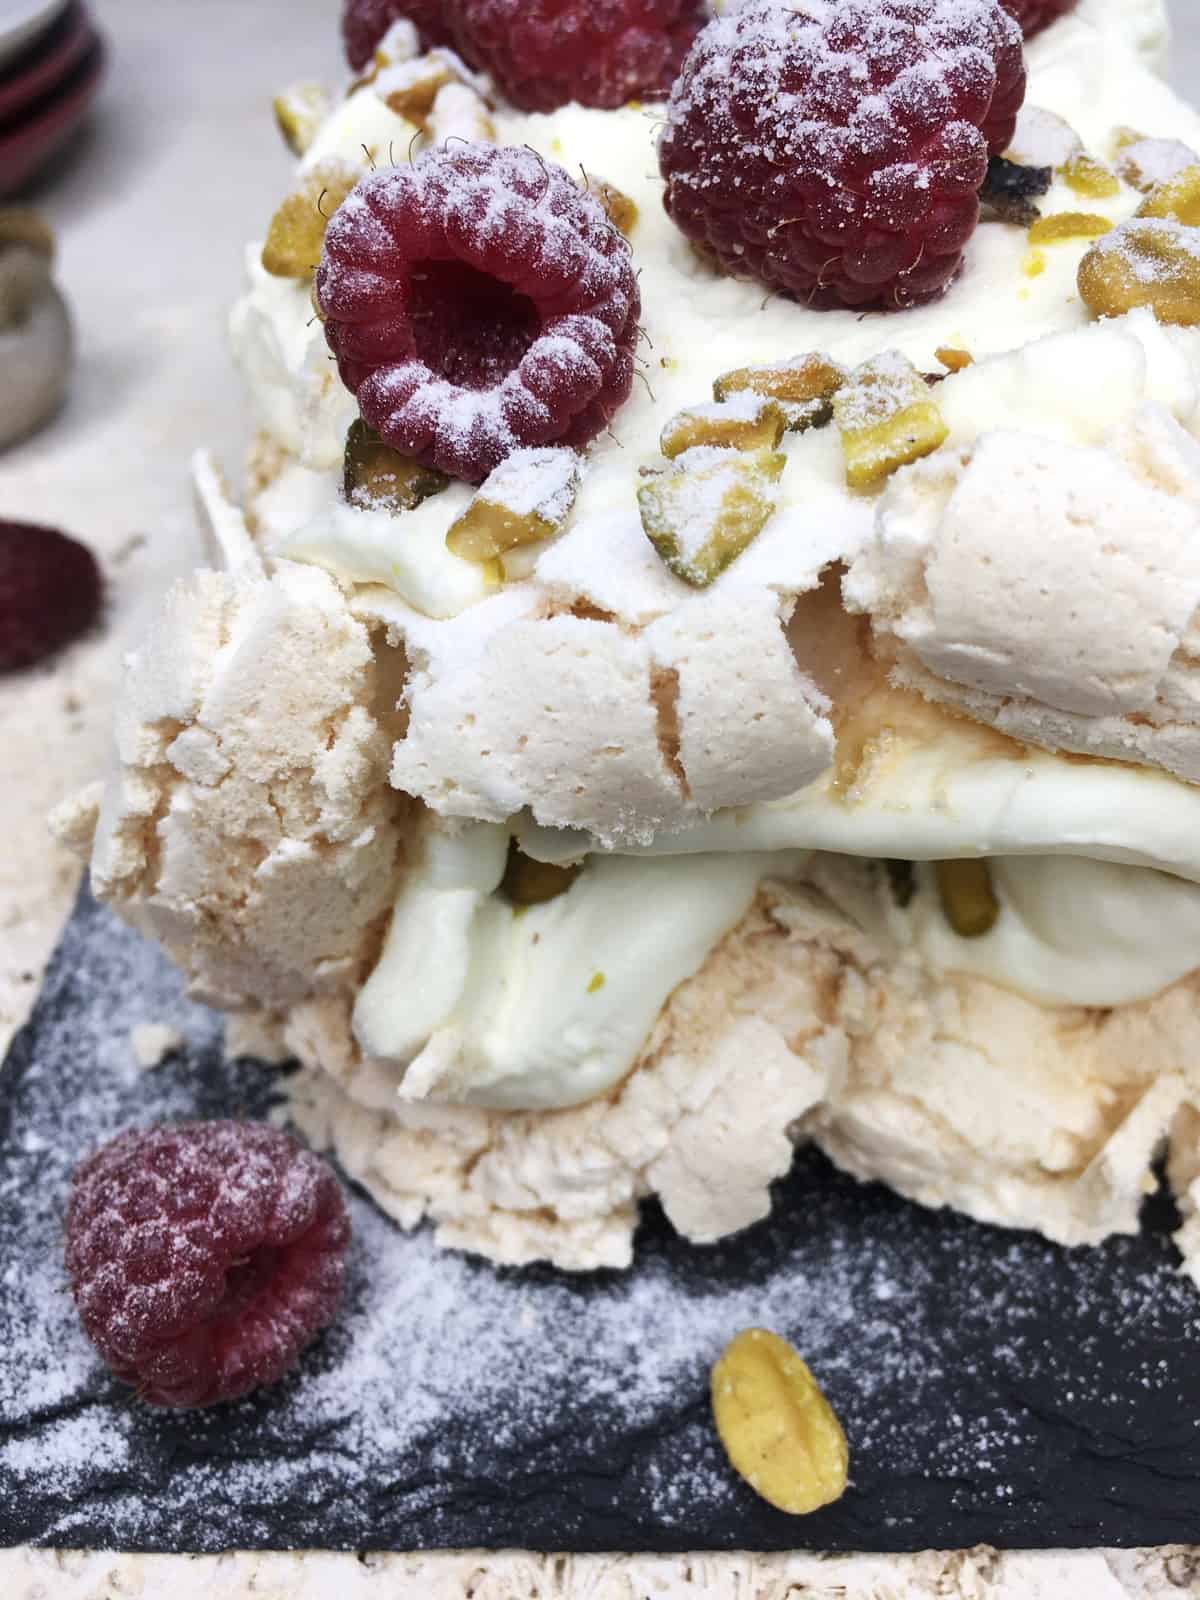 Decorated rosewater meringue roulade on a black serving board with plates in the background